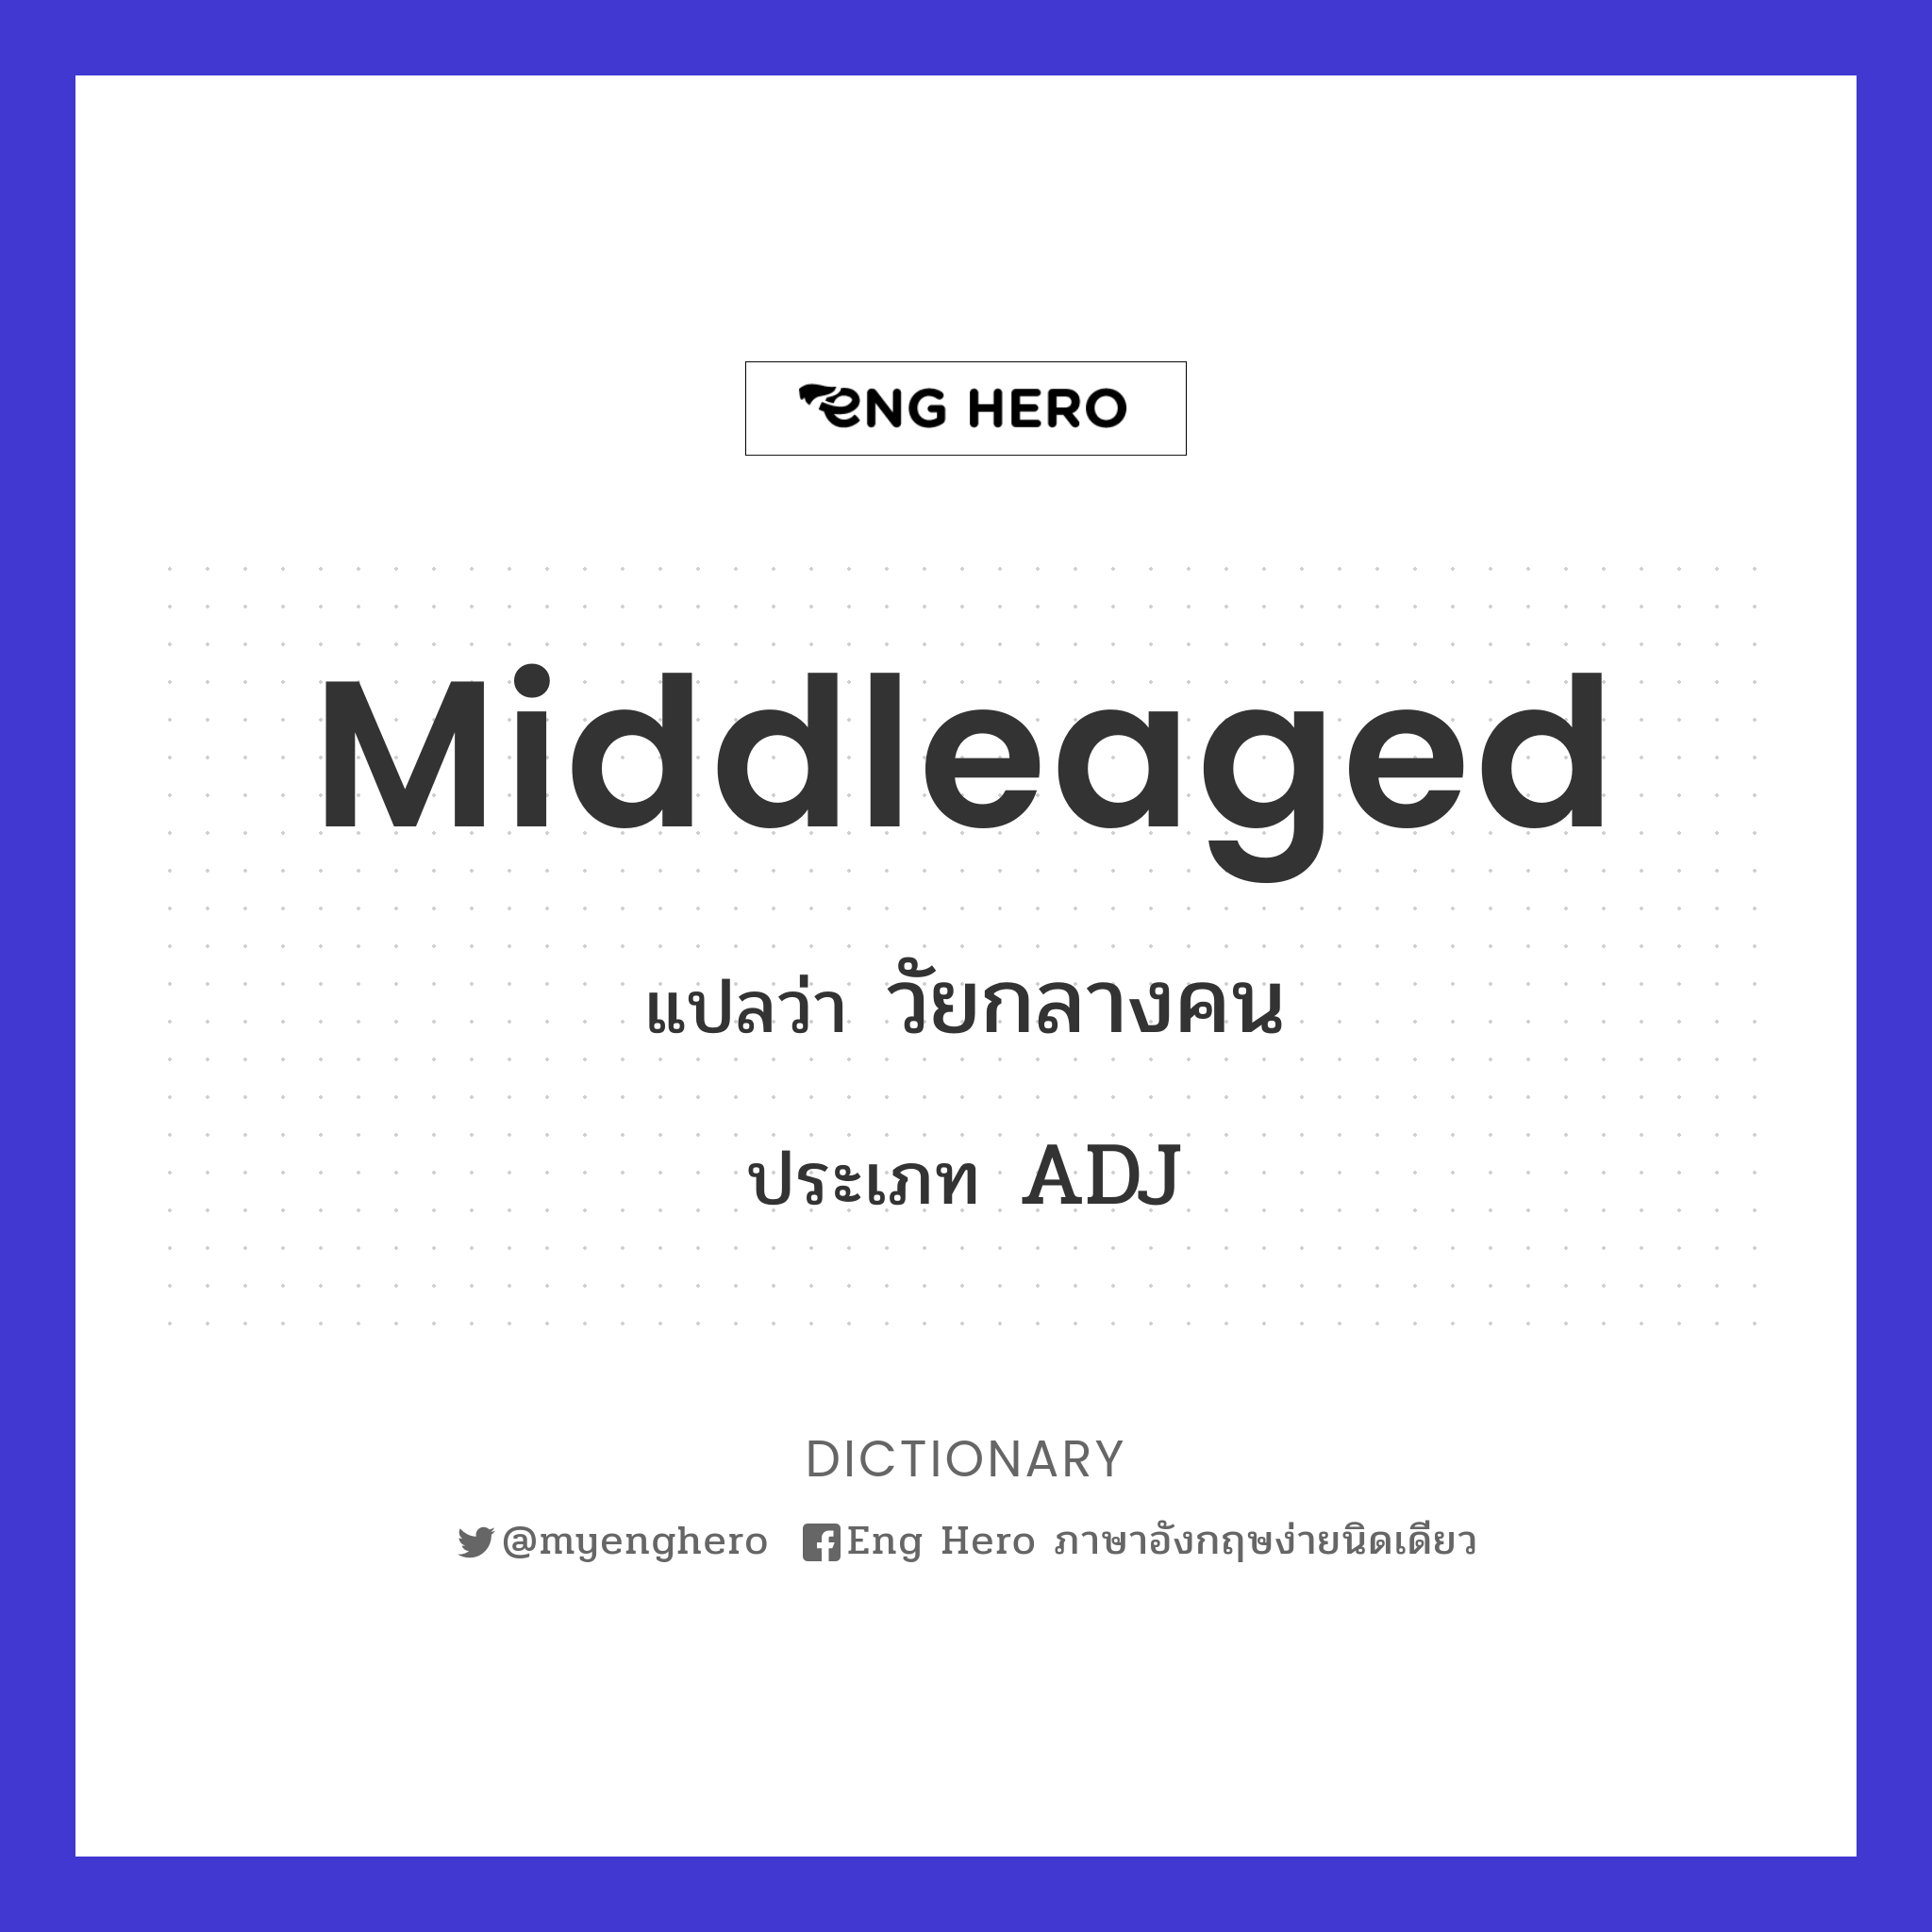 middleaged